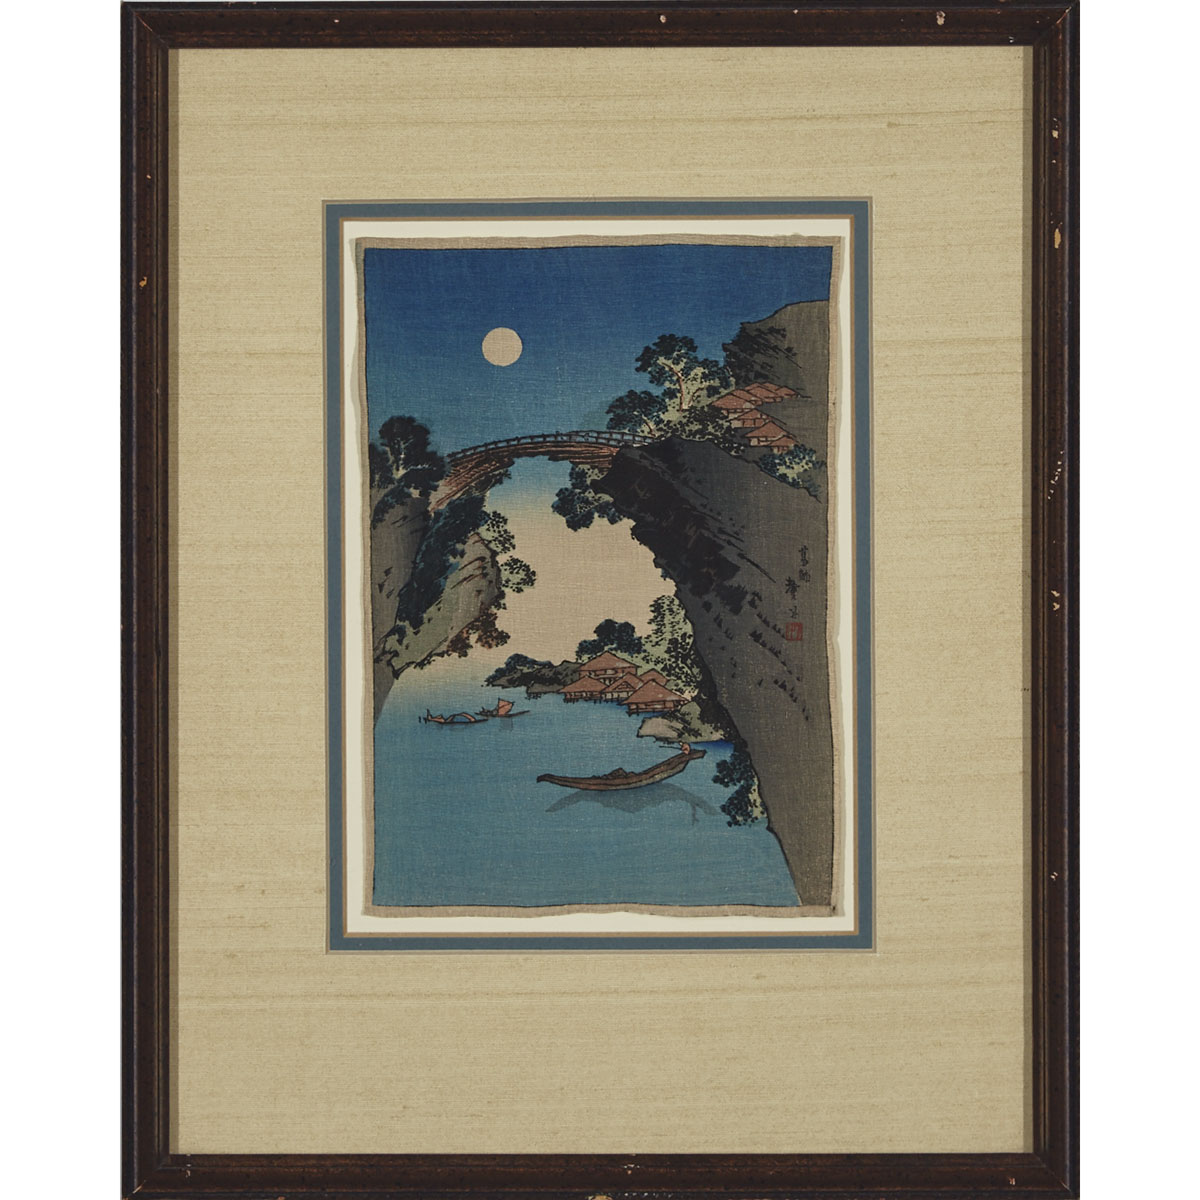 Pair of Japanese Scroll Paintings and a Framed Landscape Print